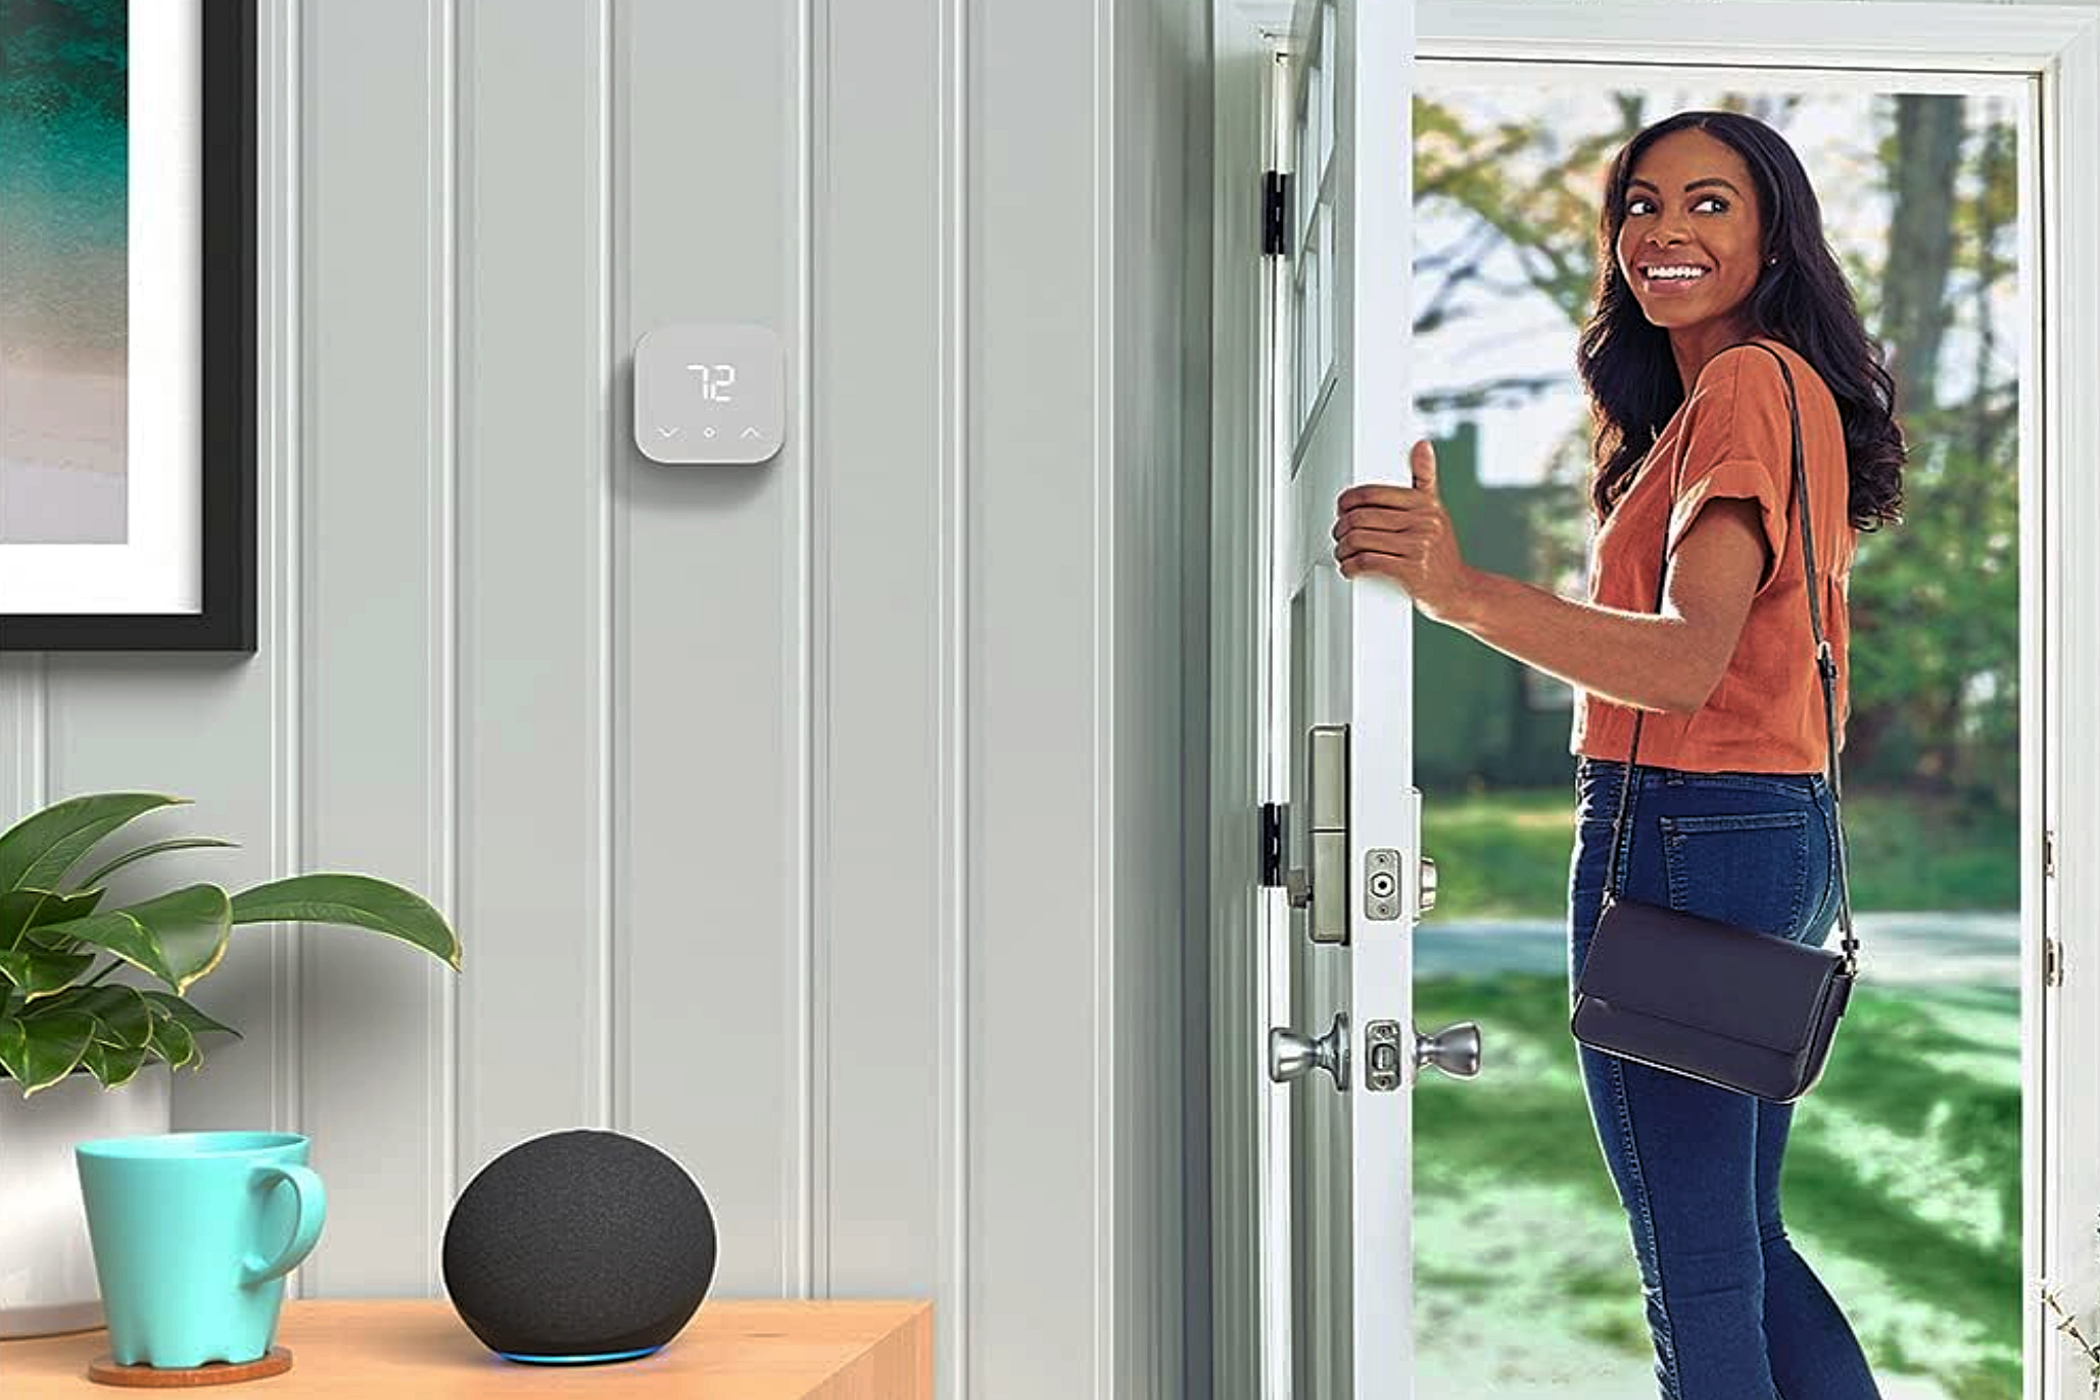 A woman leaving home with Amazon Echo Dot (5th Gen) on a desk and an Amazon Smart Thermostat on the wall.